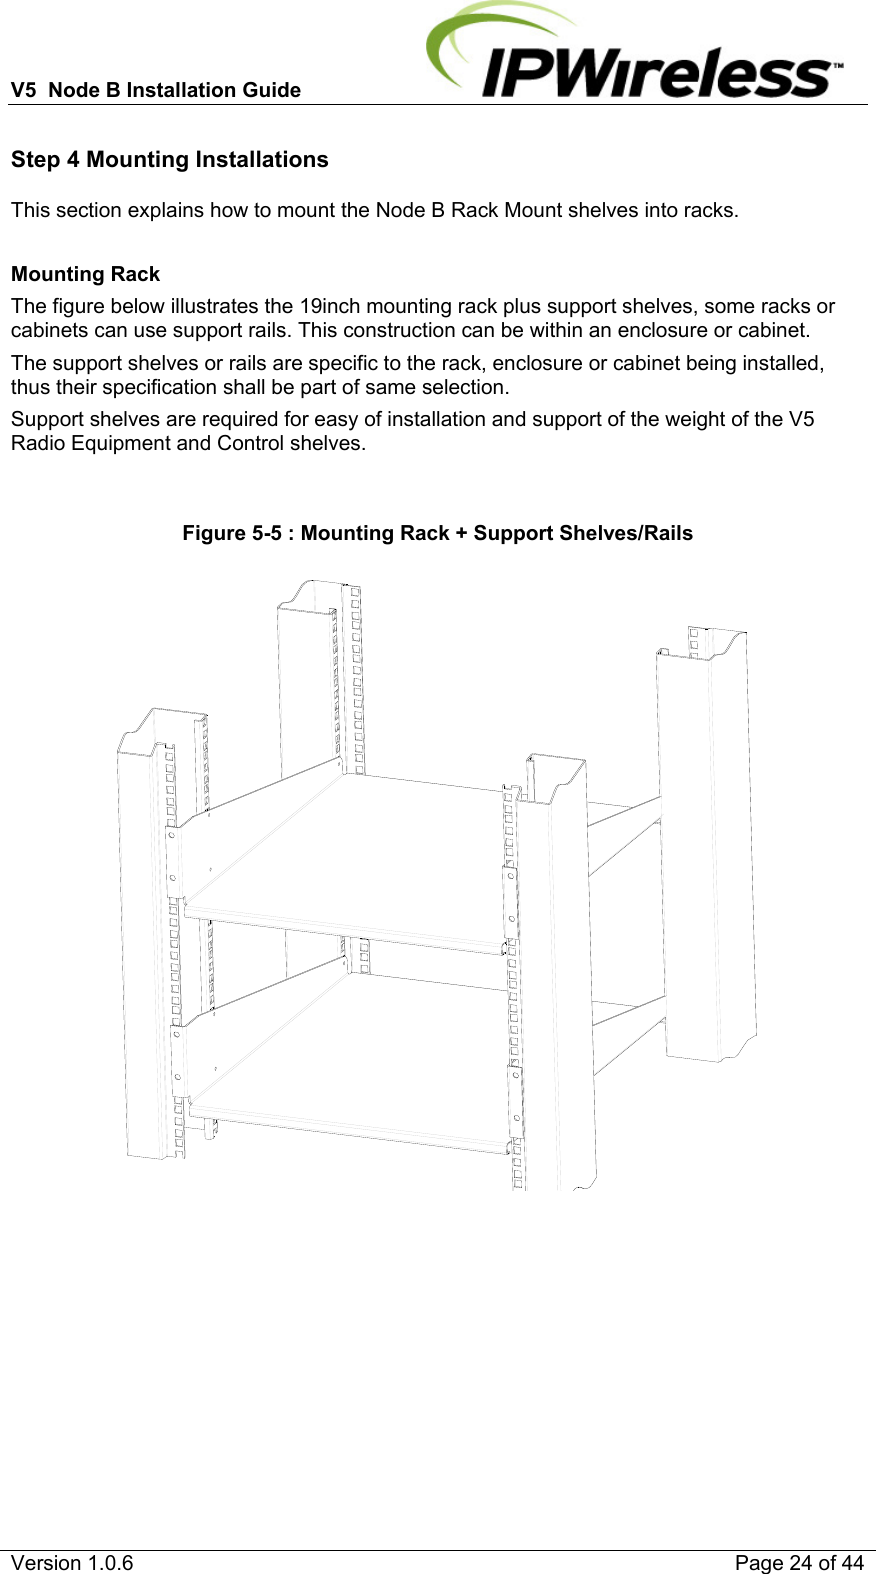 V5  Node B Installation Guide                           Version 1.0.6    Page 24 of 44 Step 4 Mounting Installations This section explains how to mount the Node B Rack Mount shelves into racks.  Mounting Rack The figure below illustrates the 19inch mounting rack plus support shelves, some racks or cabinets can use support rails. This construction can be within an enclosure or cabinet. The support shelves or rails are specific to the rack, enclosure or cabinet being installed, thus their specification shall be part of same selection. Support shelves are required for easy of installation and support of the weight of the V5 Radio Equipment and Control shelves.  Figure 5-5 : Mounting Rack + Support Shelves/Rails      